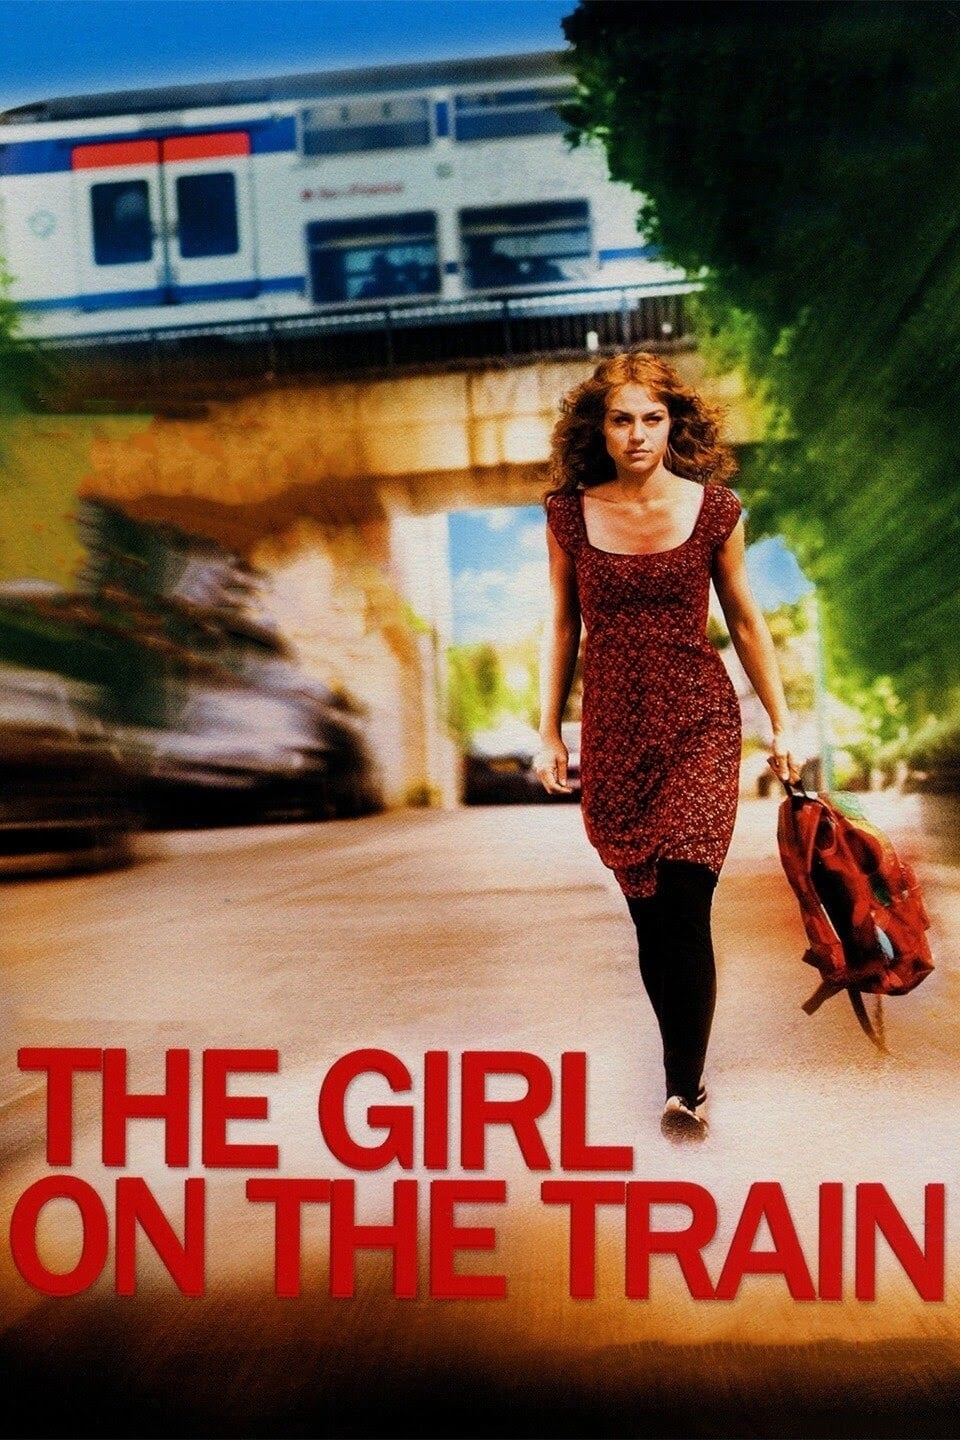 The Girl on the Train (2009)